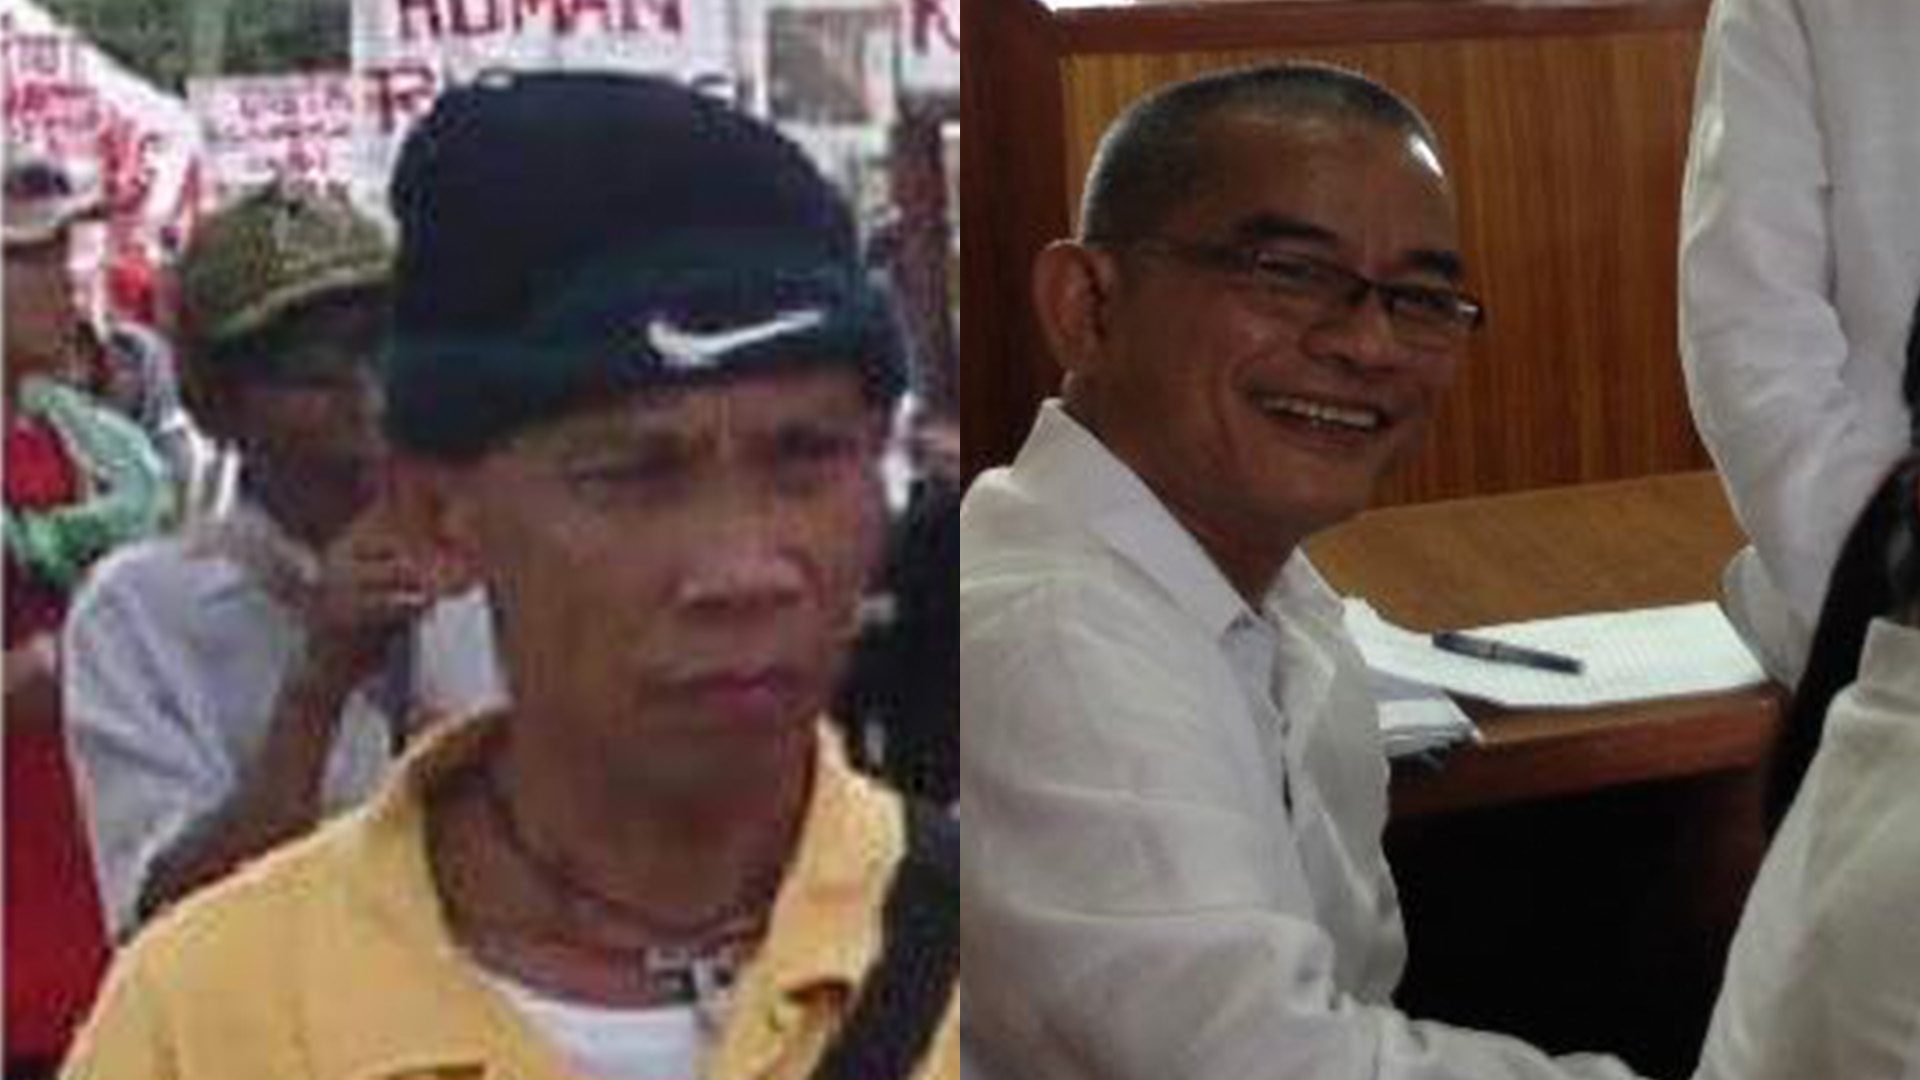 Army men convicted in 2010 killing of activist ‘but it’s tragic that people have to die’